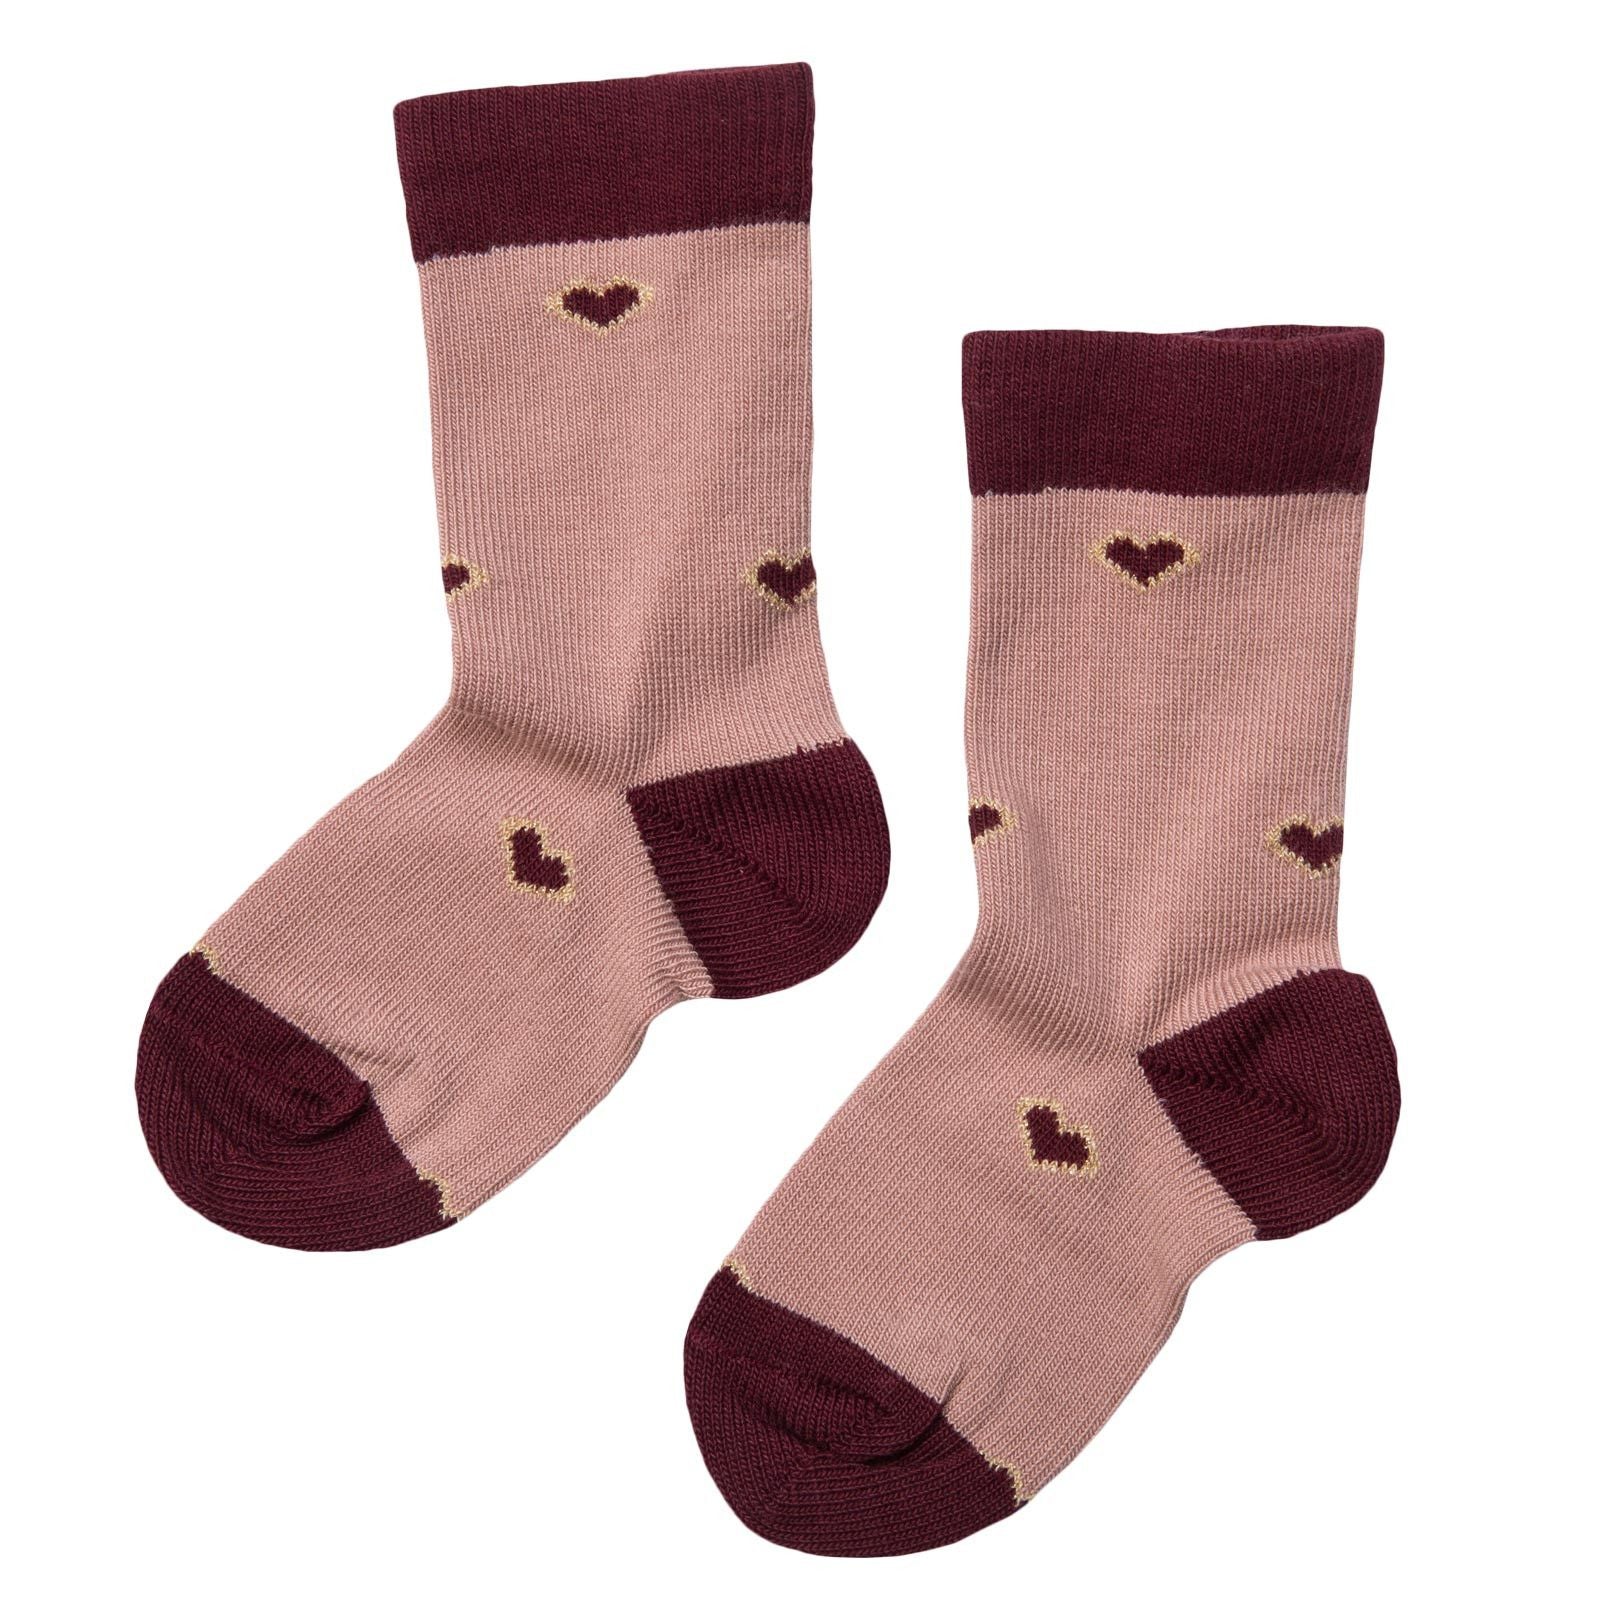 Girls Dusty Pink Embroidered Hearts Socks - CÉMAROSE | Children's Fashion Store - 2